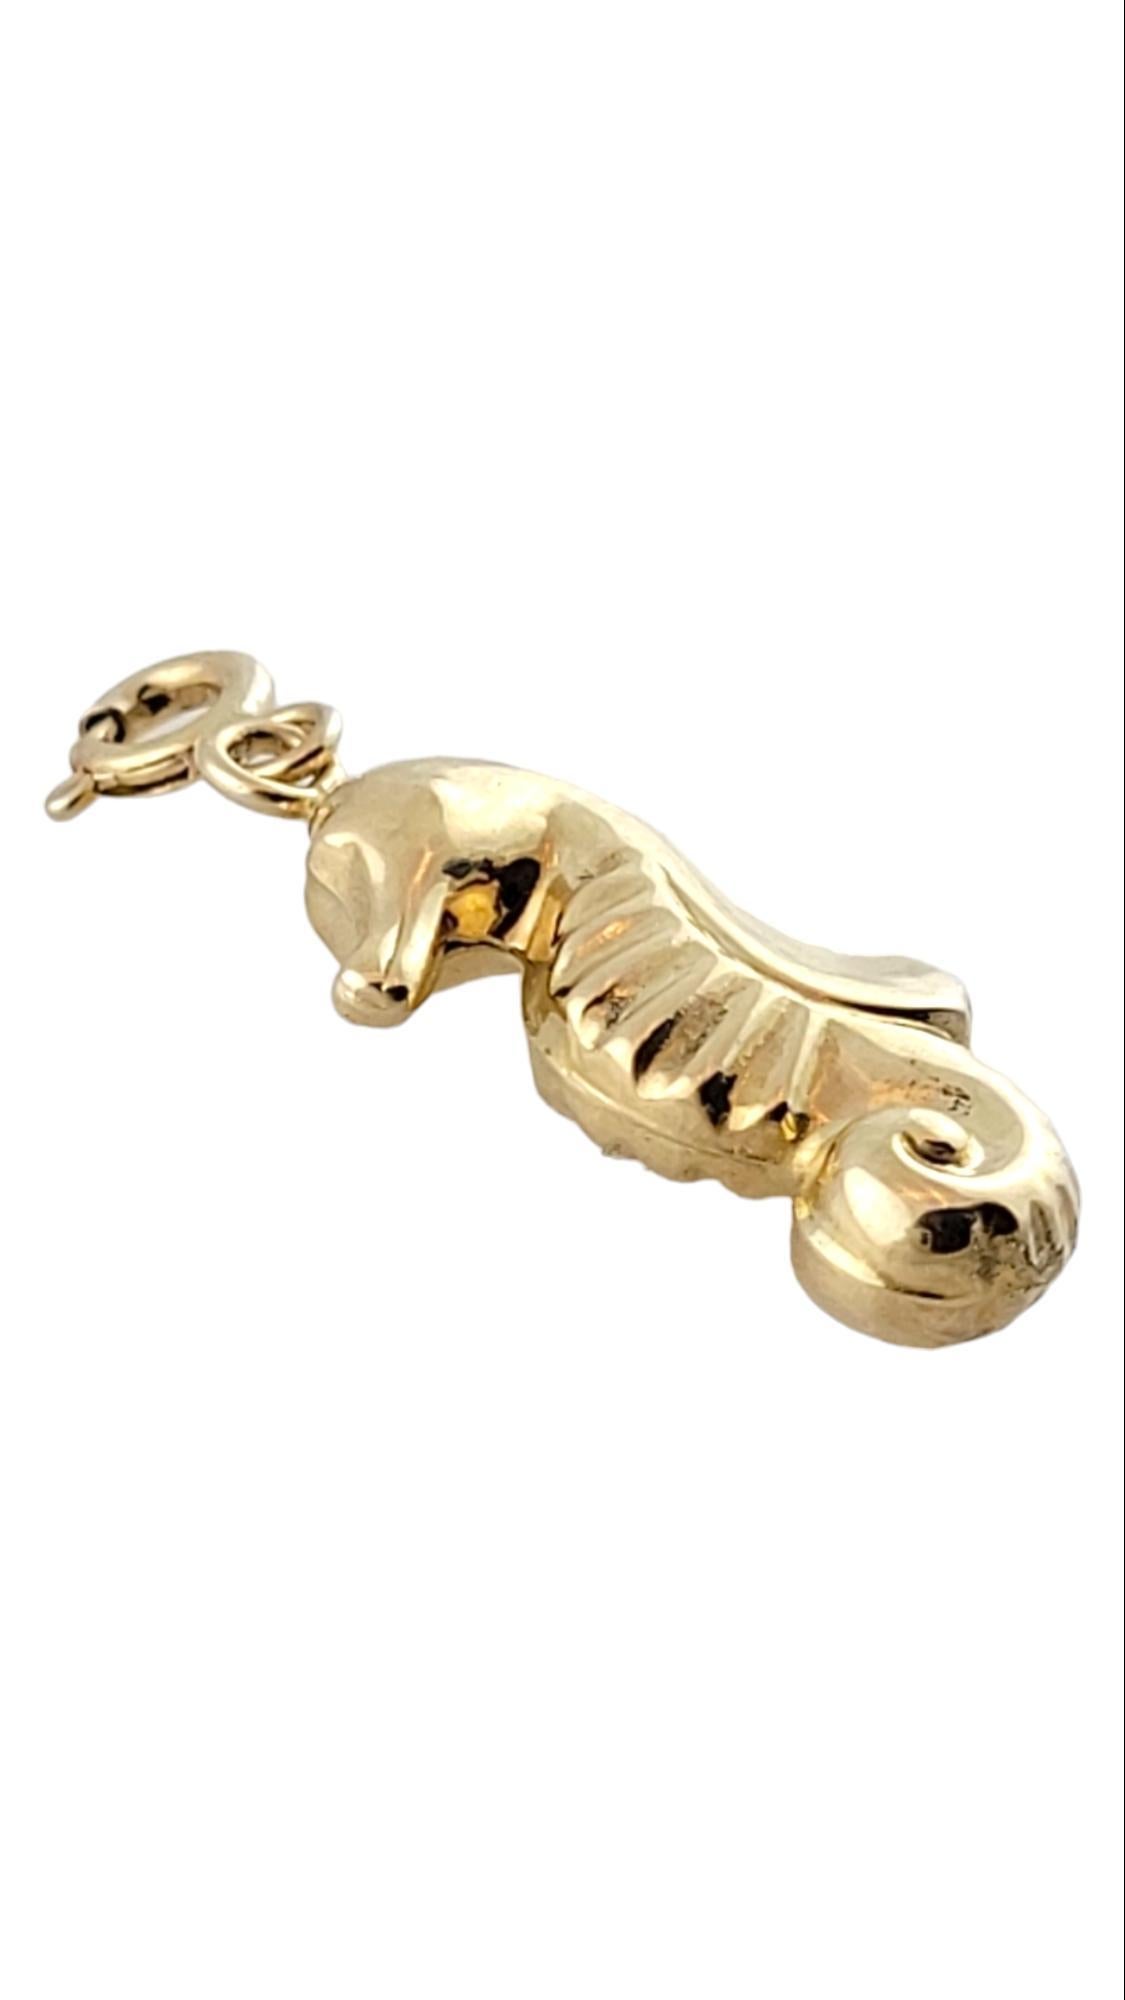 Vintage 14K Yellow Gold Seahorse Charm-

The seahorse is believed to be a lucky charm and a symbol of protection. This adorable charm is crafted in beautifully detailed 14K gold. 

Size: 24.7 mm X 12.4 mm X 4.8 mm

Stamped: OT 14K Turkey  

Weight: